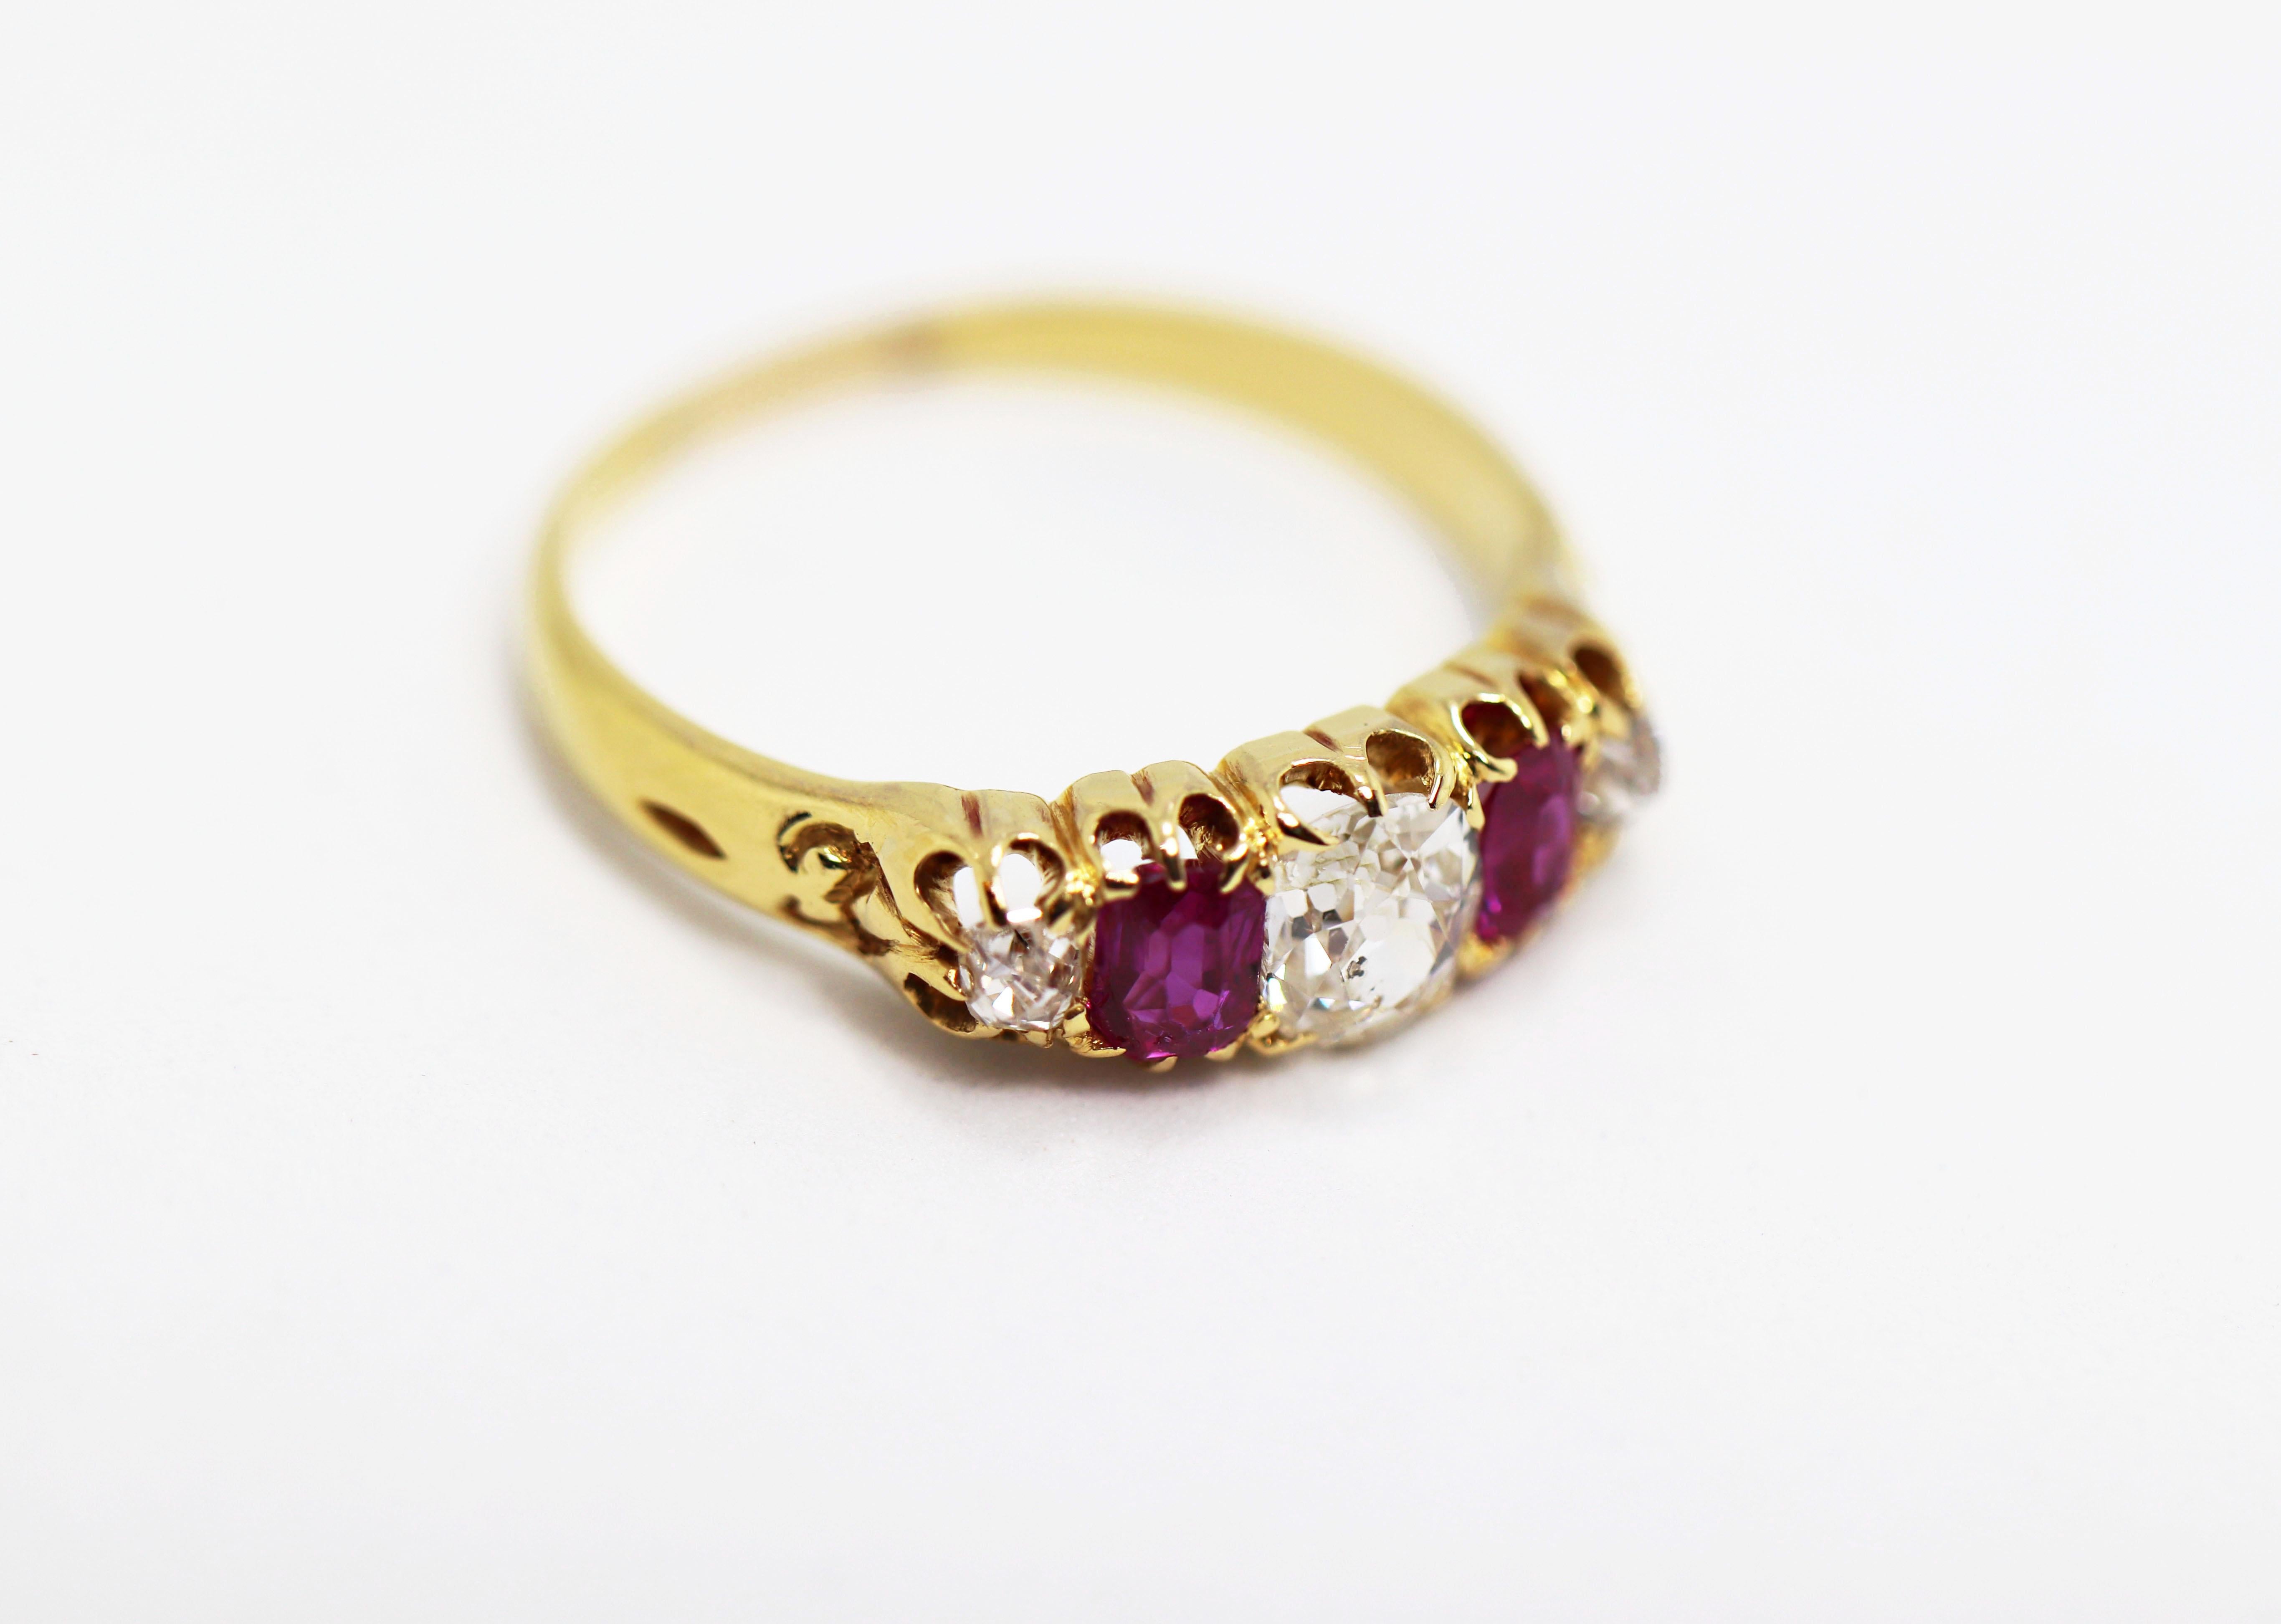 Late Victorian Antique 5-Stone Ruby and Old Cut Diamond Ring, circa 1880